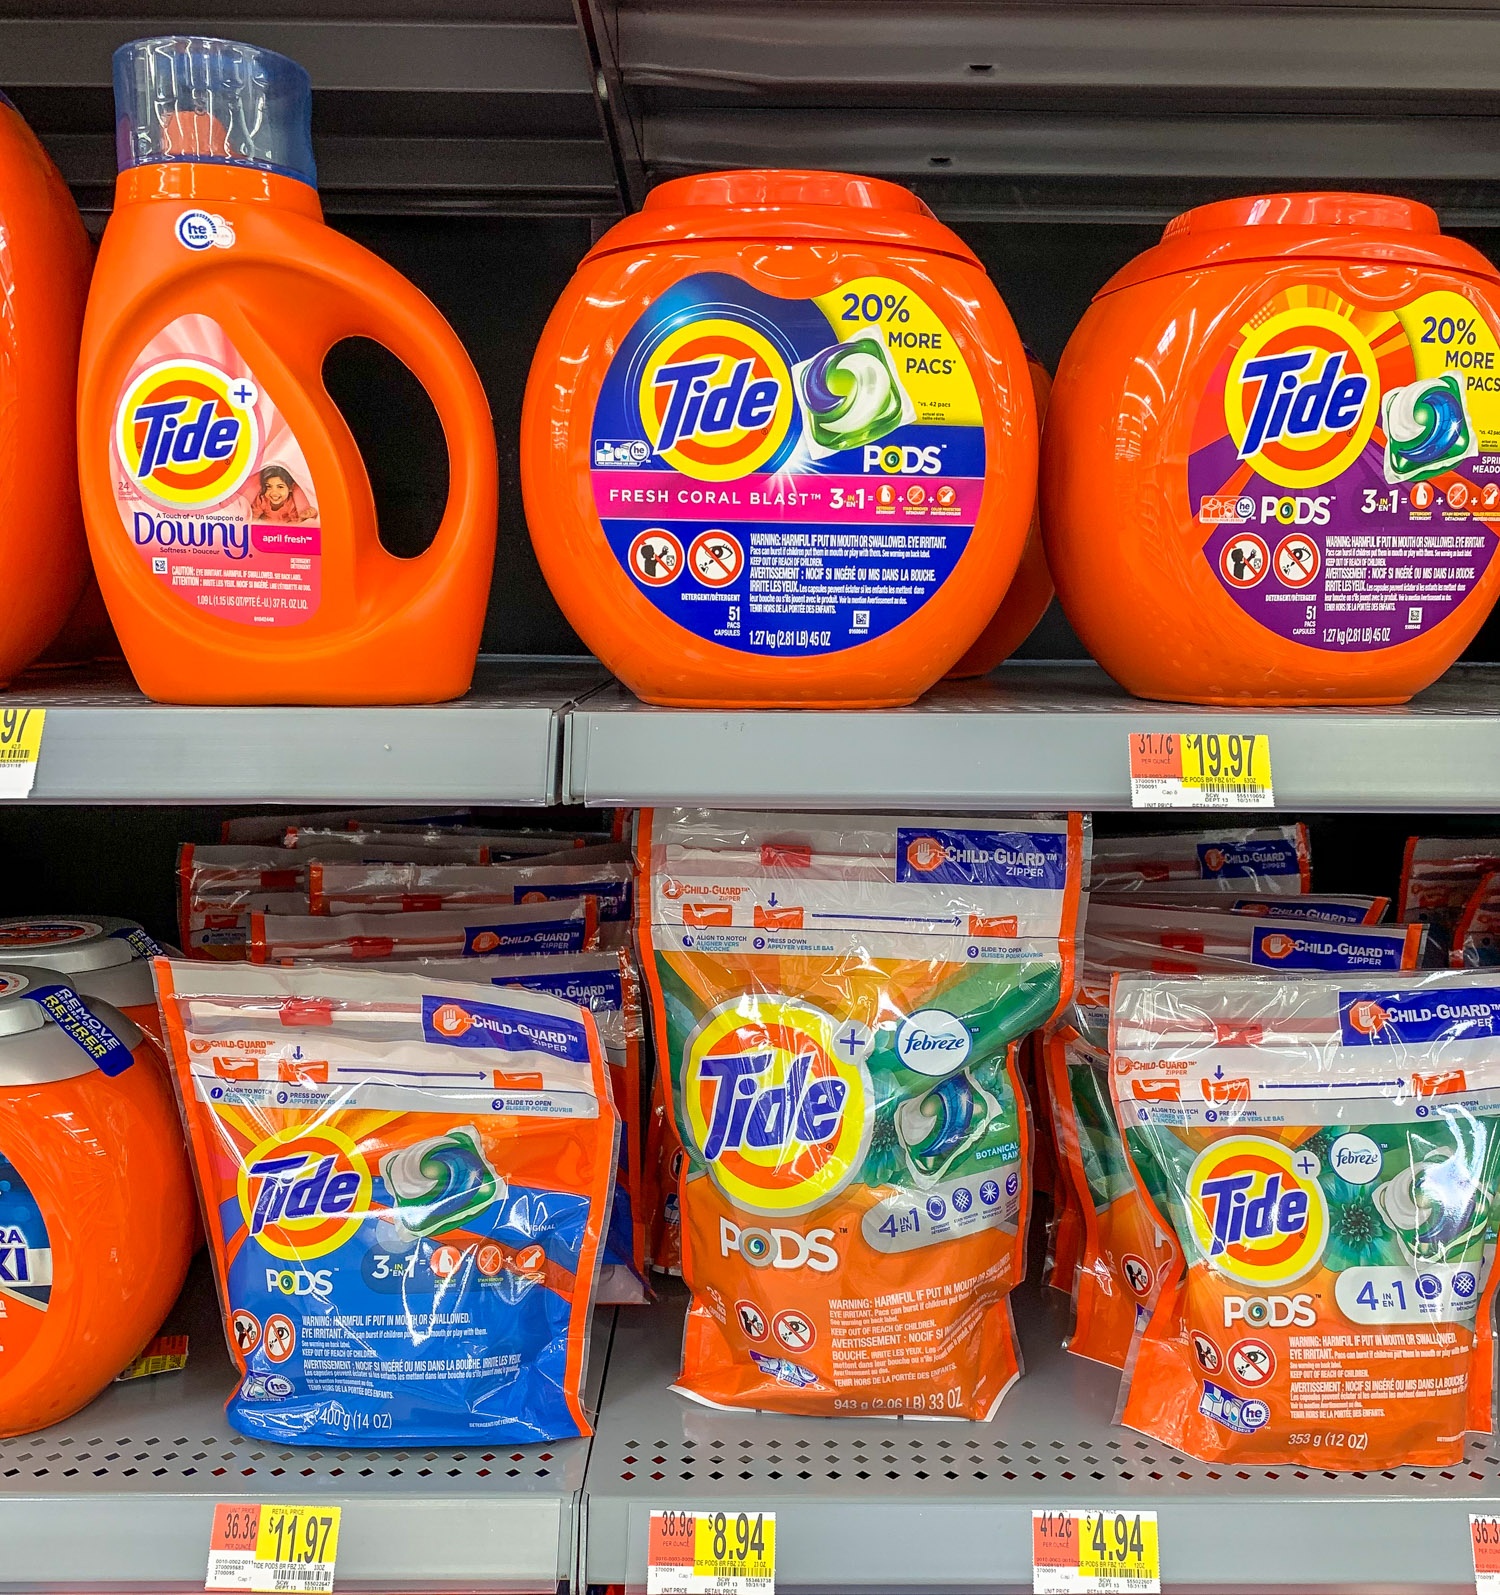 Hot* 2 More New Printable Tide Coupons + Deals At Target &amp;amp; Walmart - Tide Coupons Free Printable